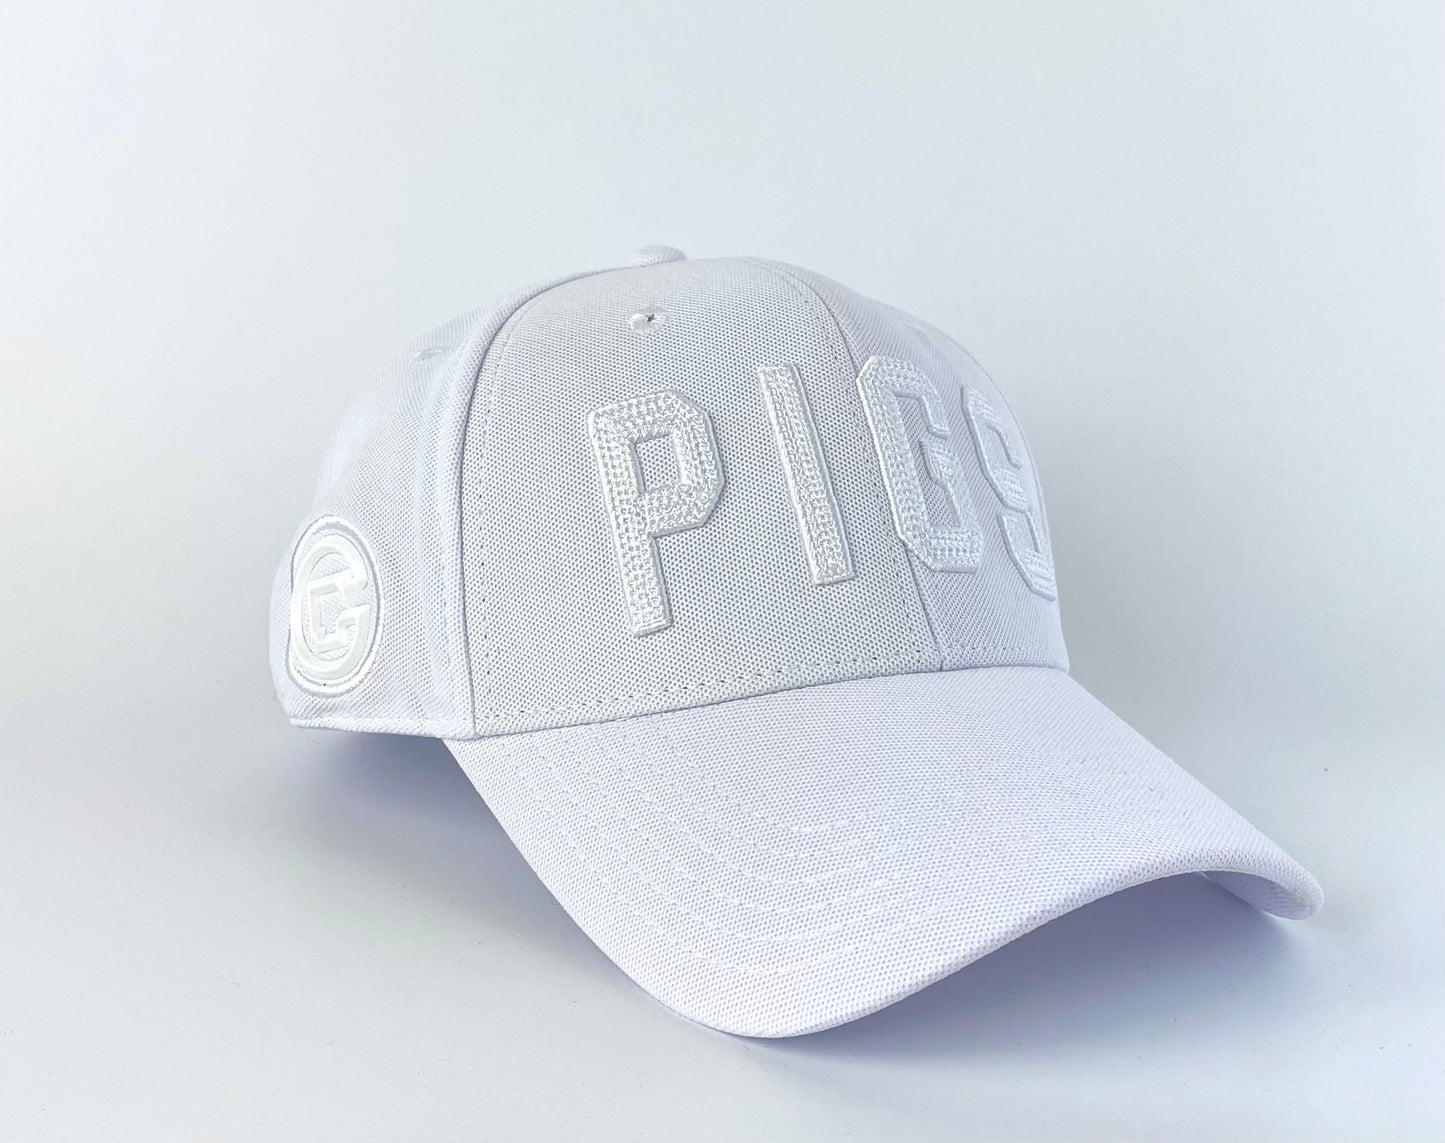 The MONOCHROMATIC "OG" PIGS - White - Snapback - Curved Bill